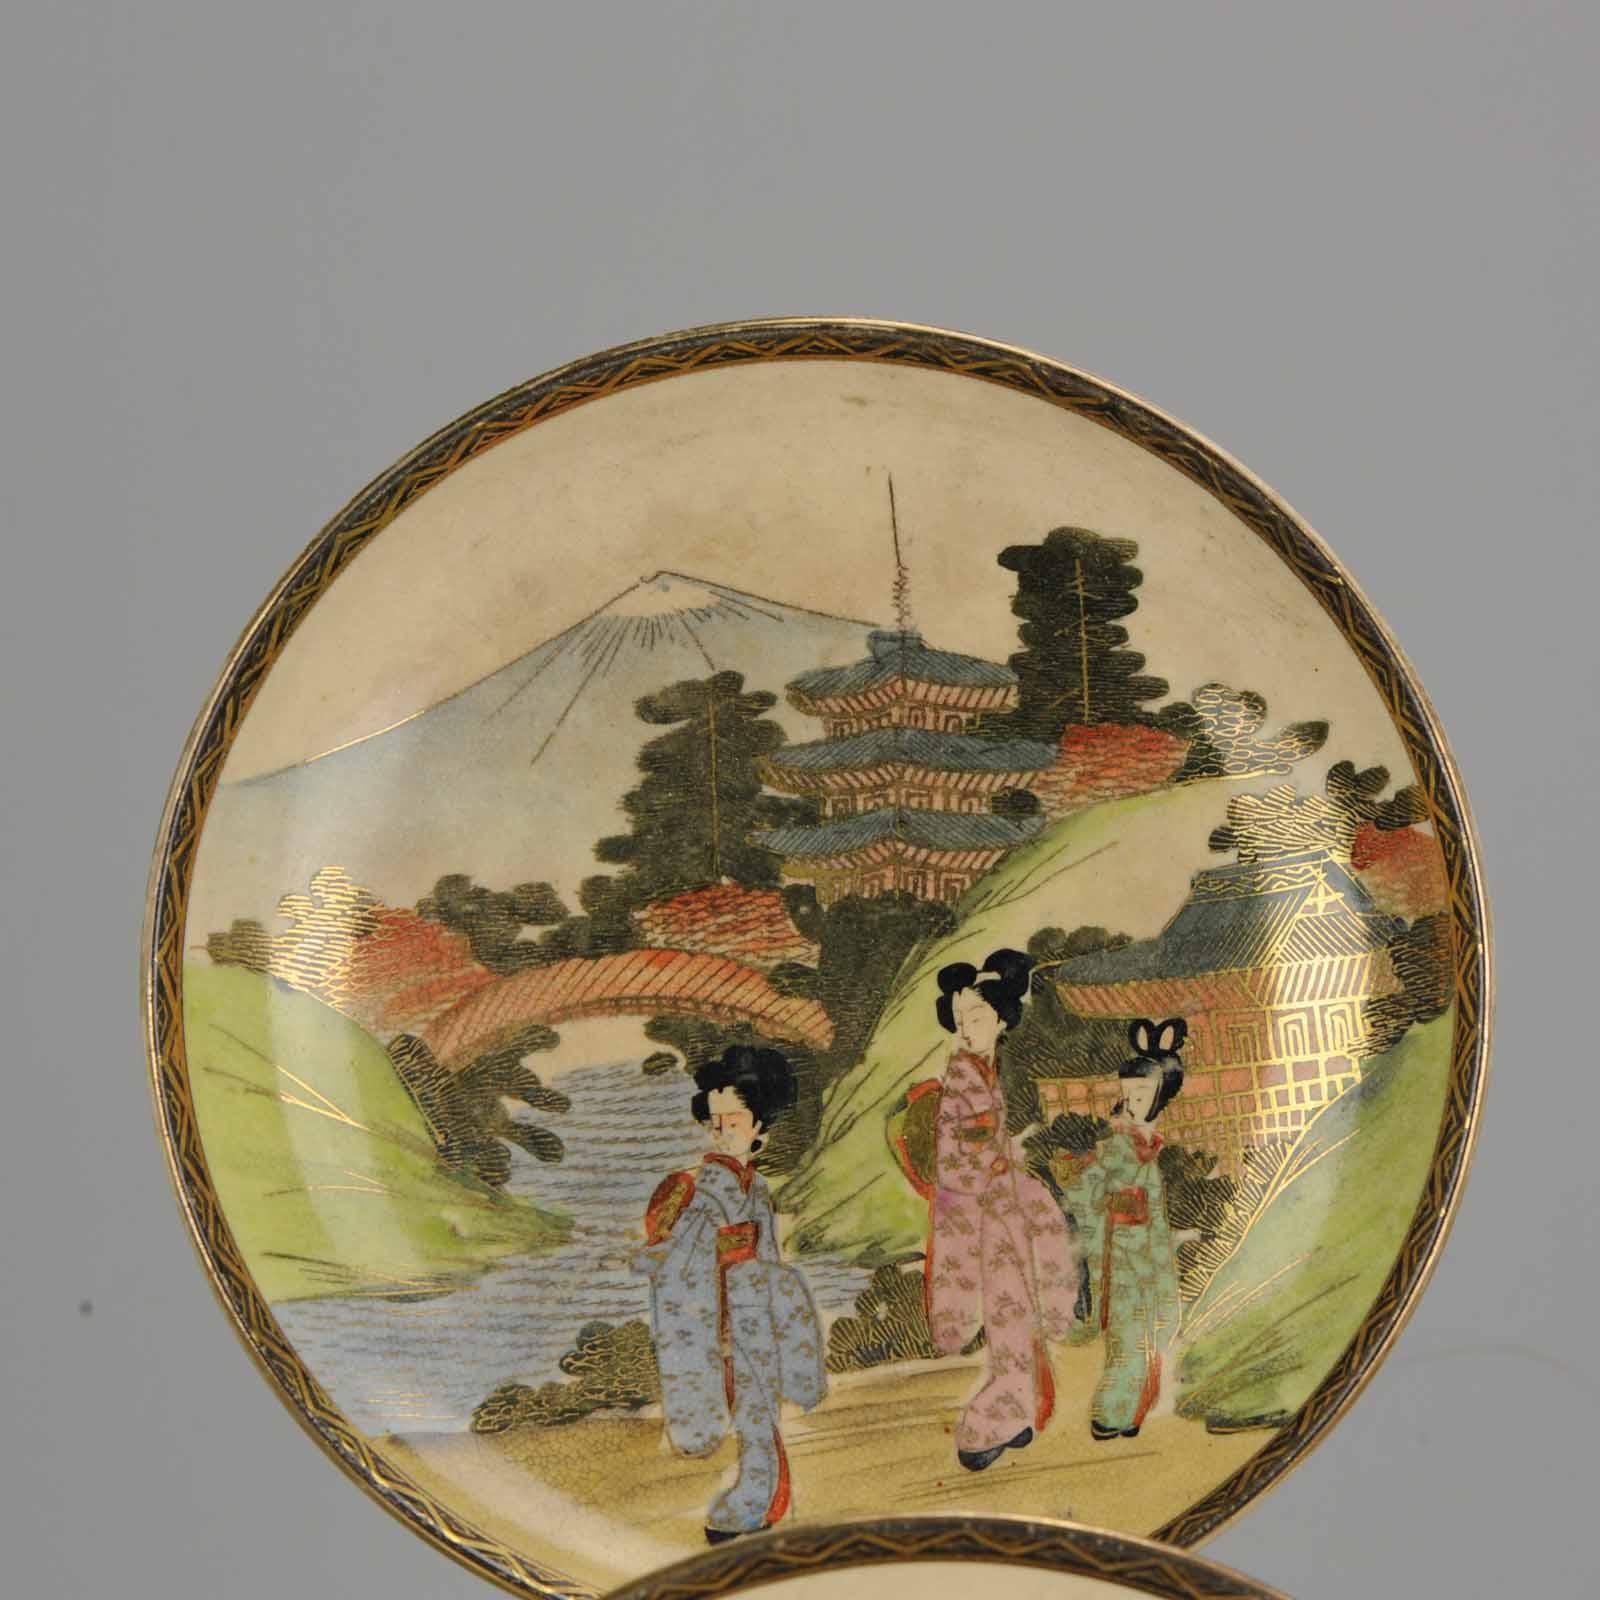 Plates, Satsuma, Meiji Period Mount Fuji Geishas, Japan, circa 1900 In Excellent Condition For Sale In Amsterdam, Noord Holland